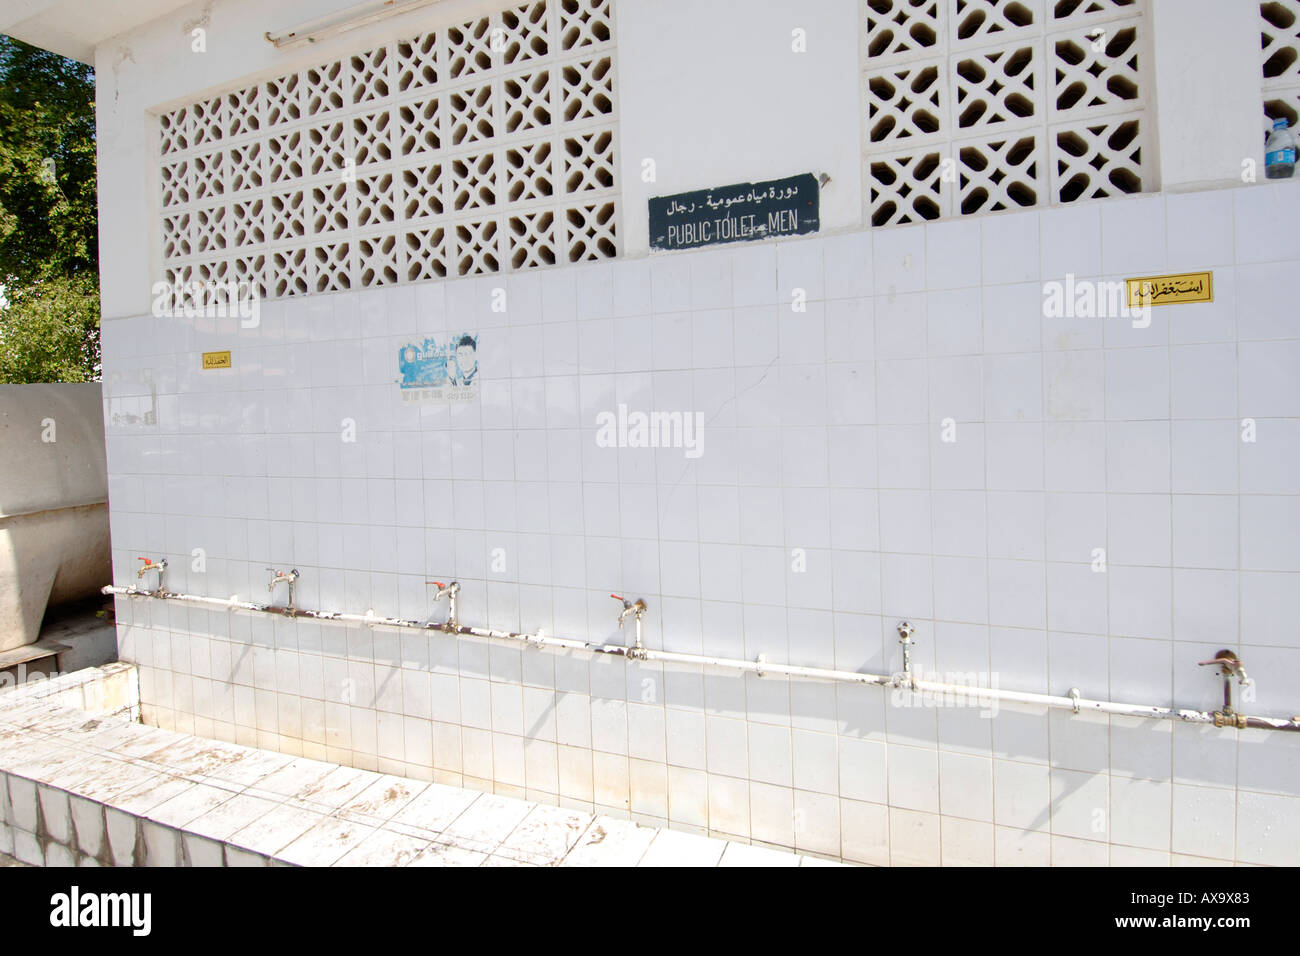 Public toilet and washing facilities for men in central Doha, Qatar. Stock Photo